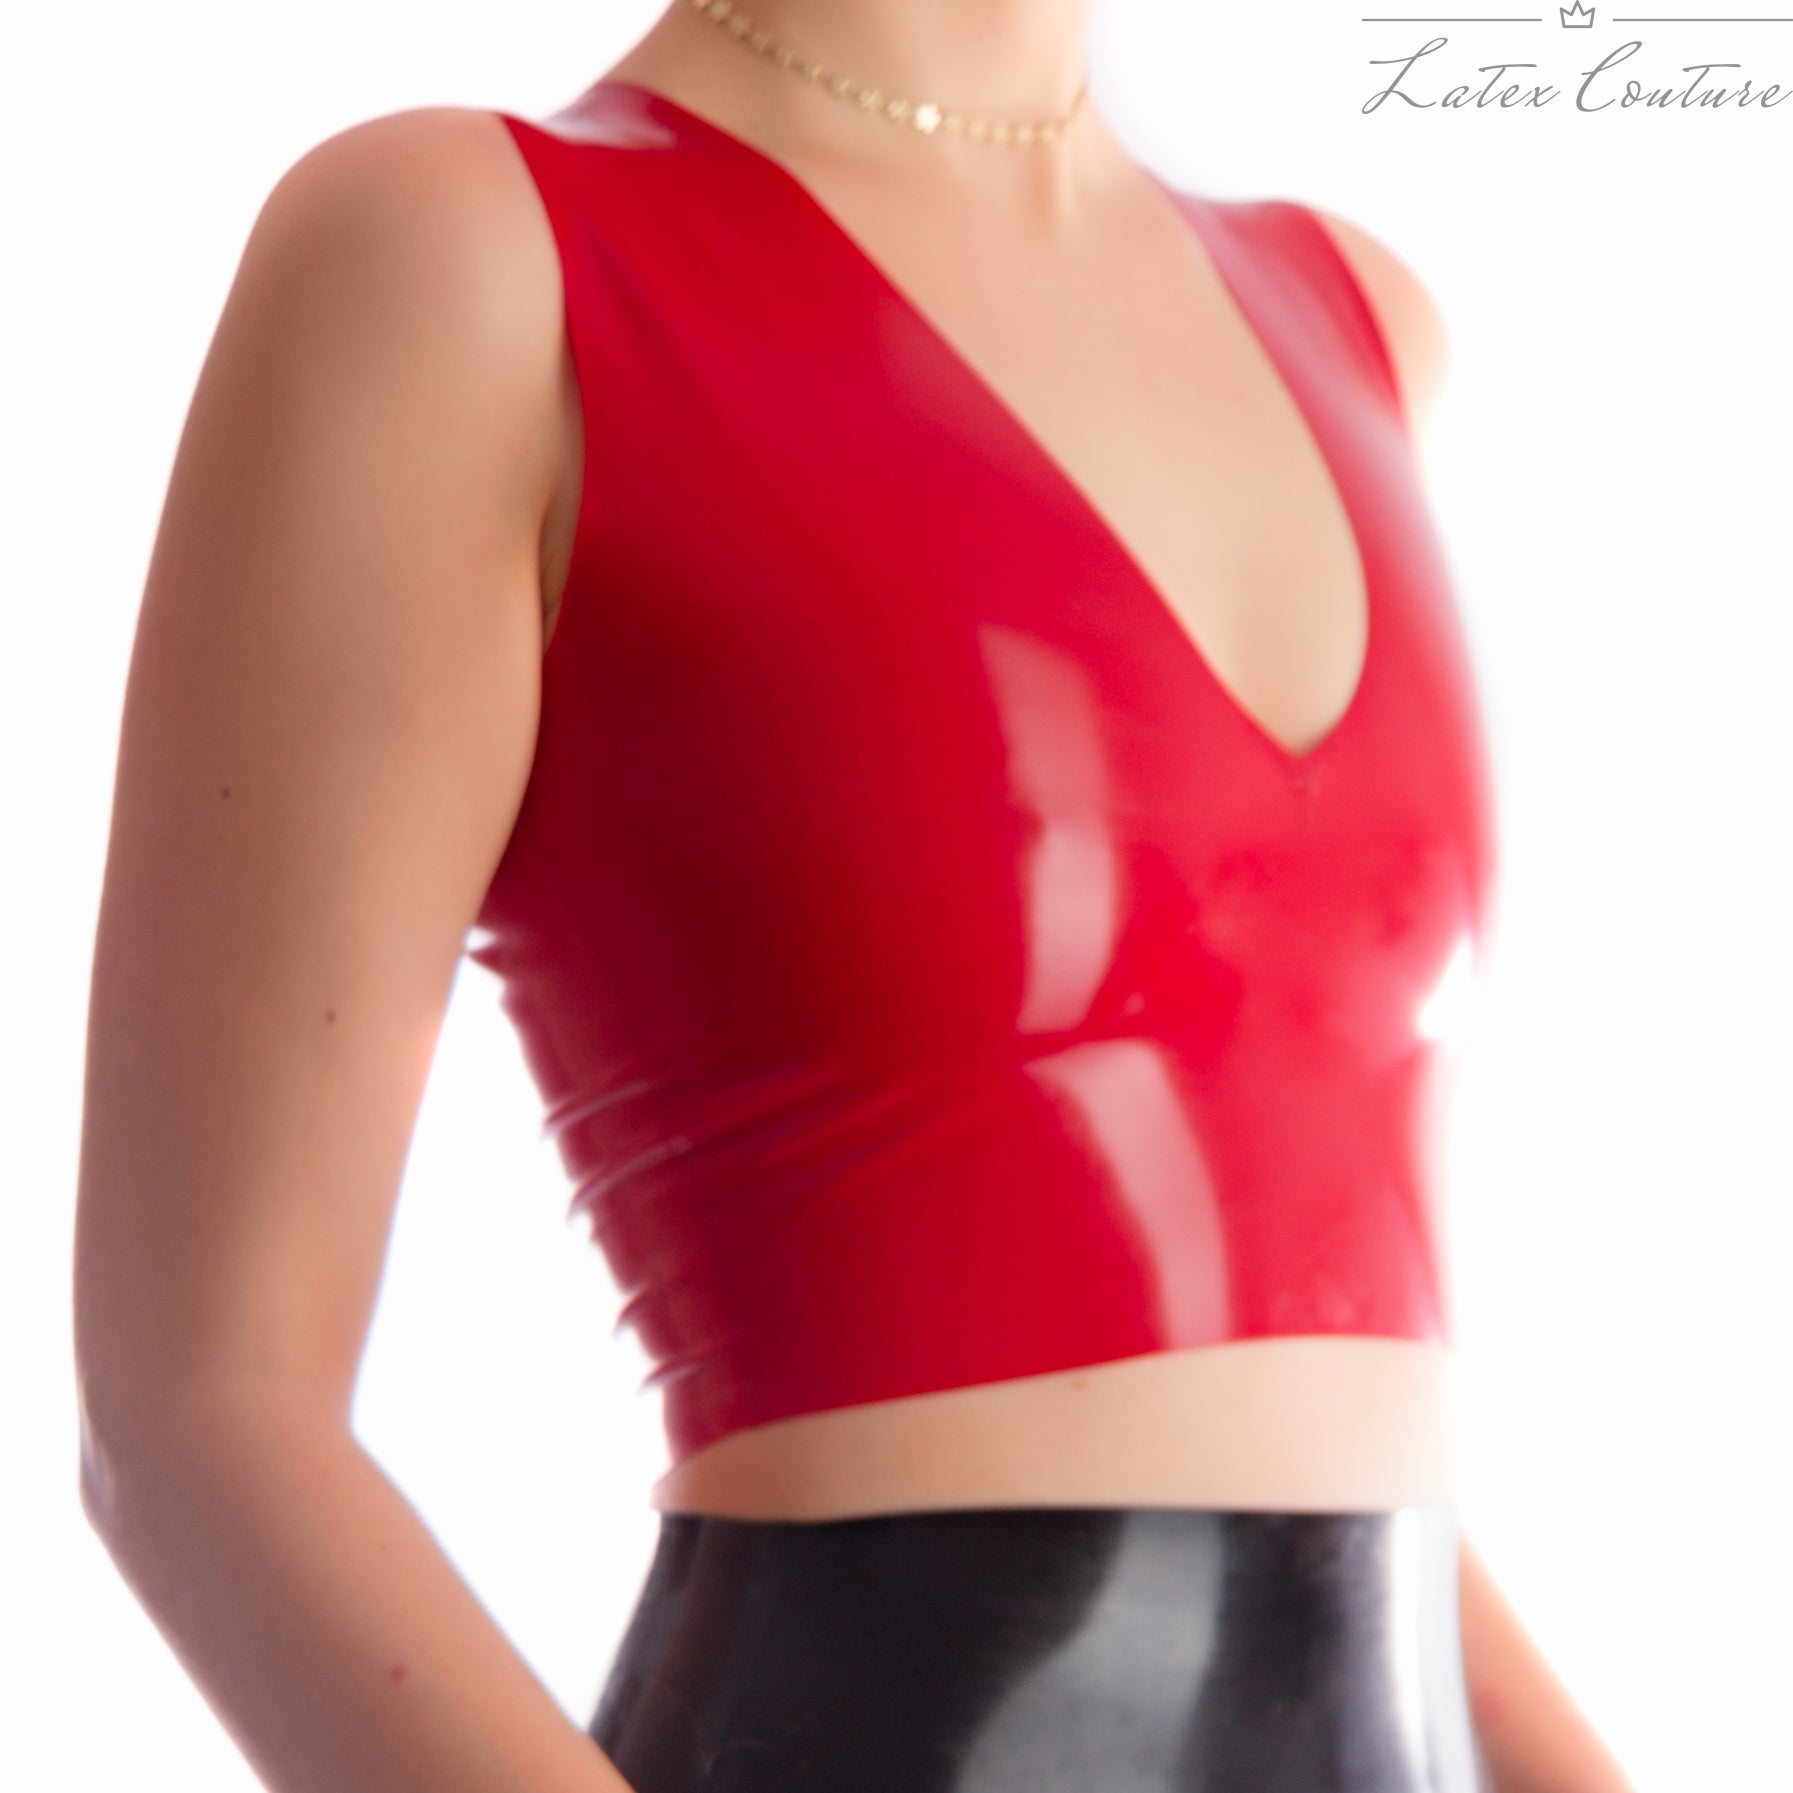 Latex Crop Top - Latex V Neck Crop Top - Latex Couture